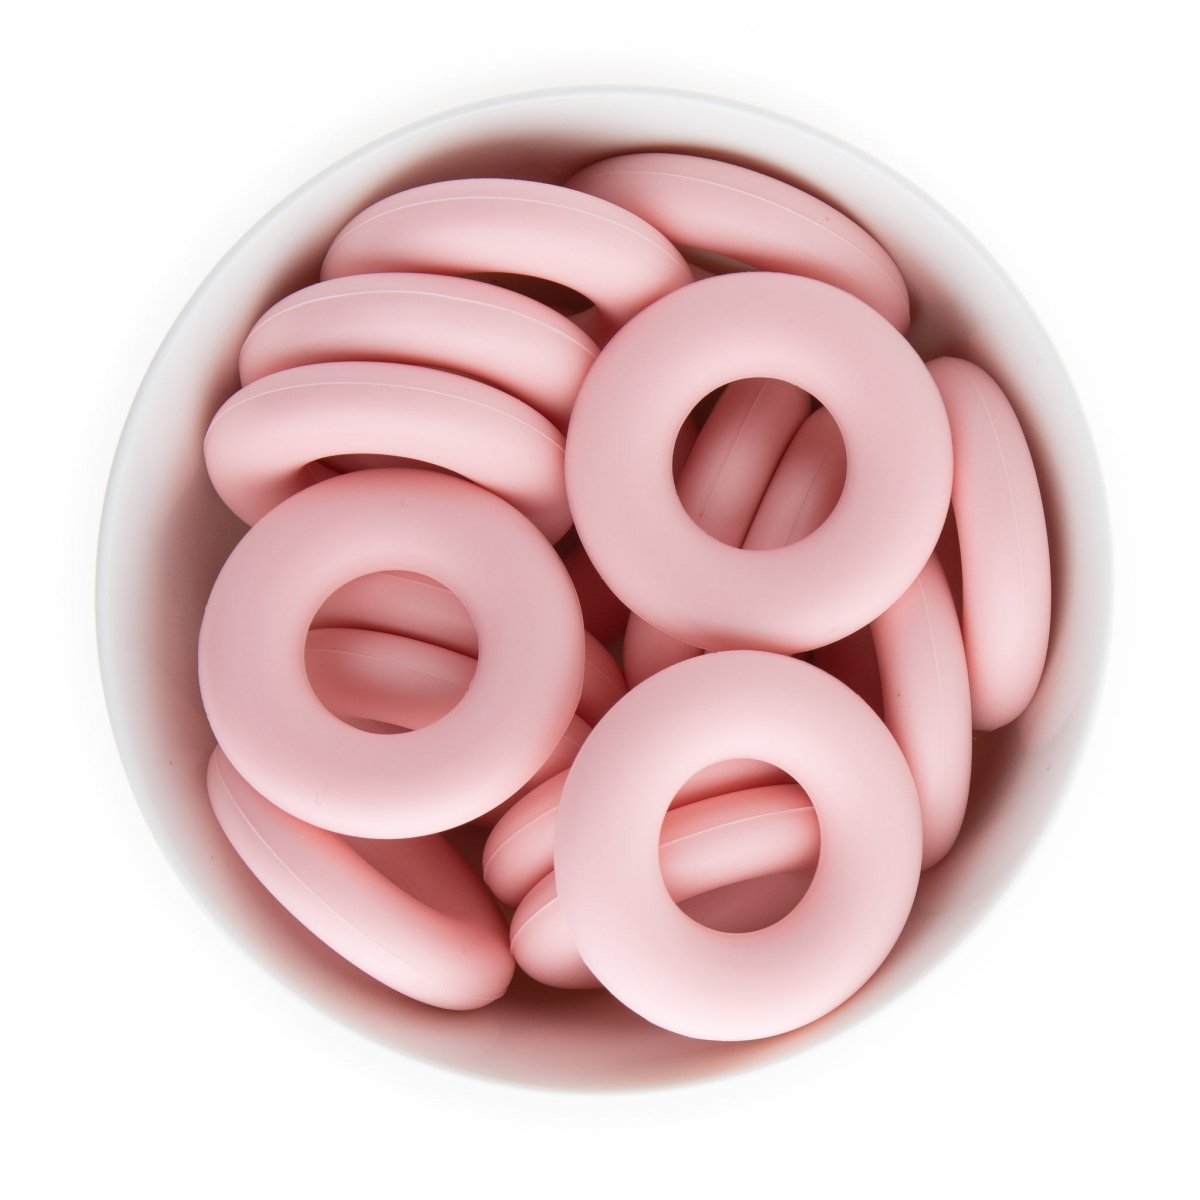 Silicone Teethers and Pendants Donuts Soft Pink from Cara & Co Craft Supply